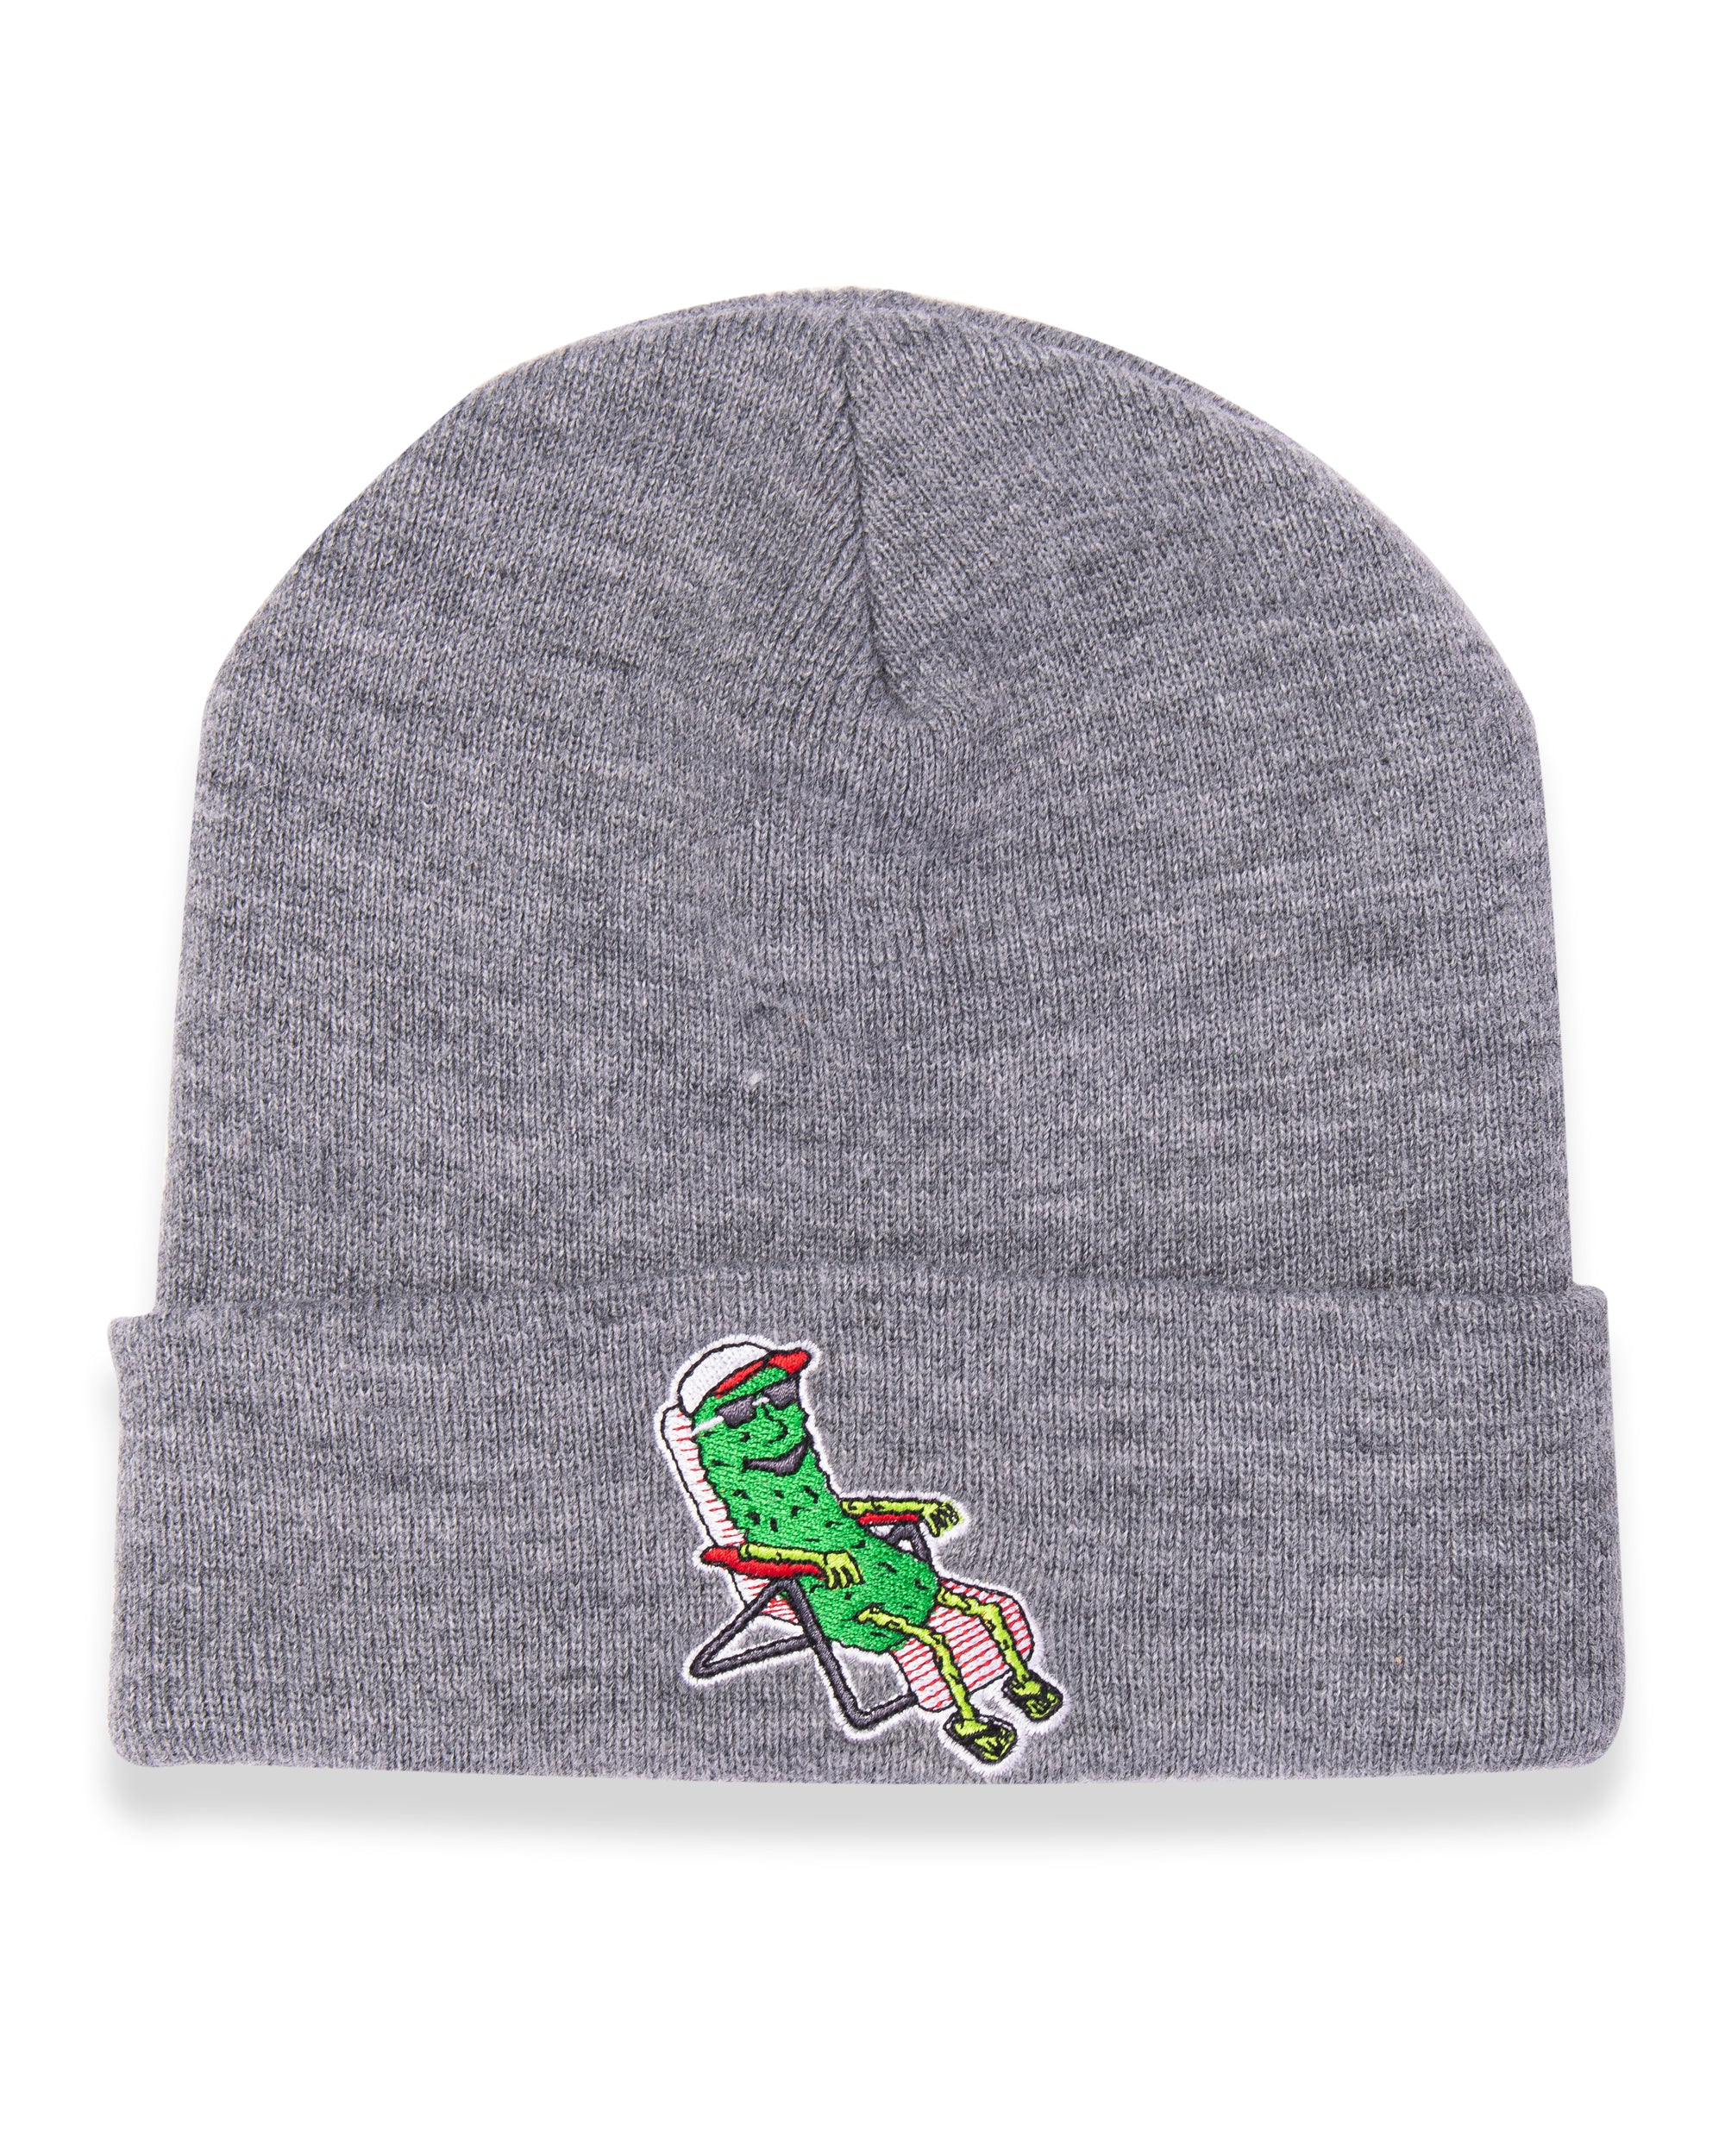 gray beanie with pickle on lawn chair design on rim